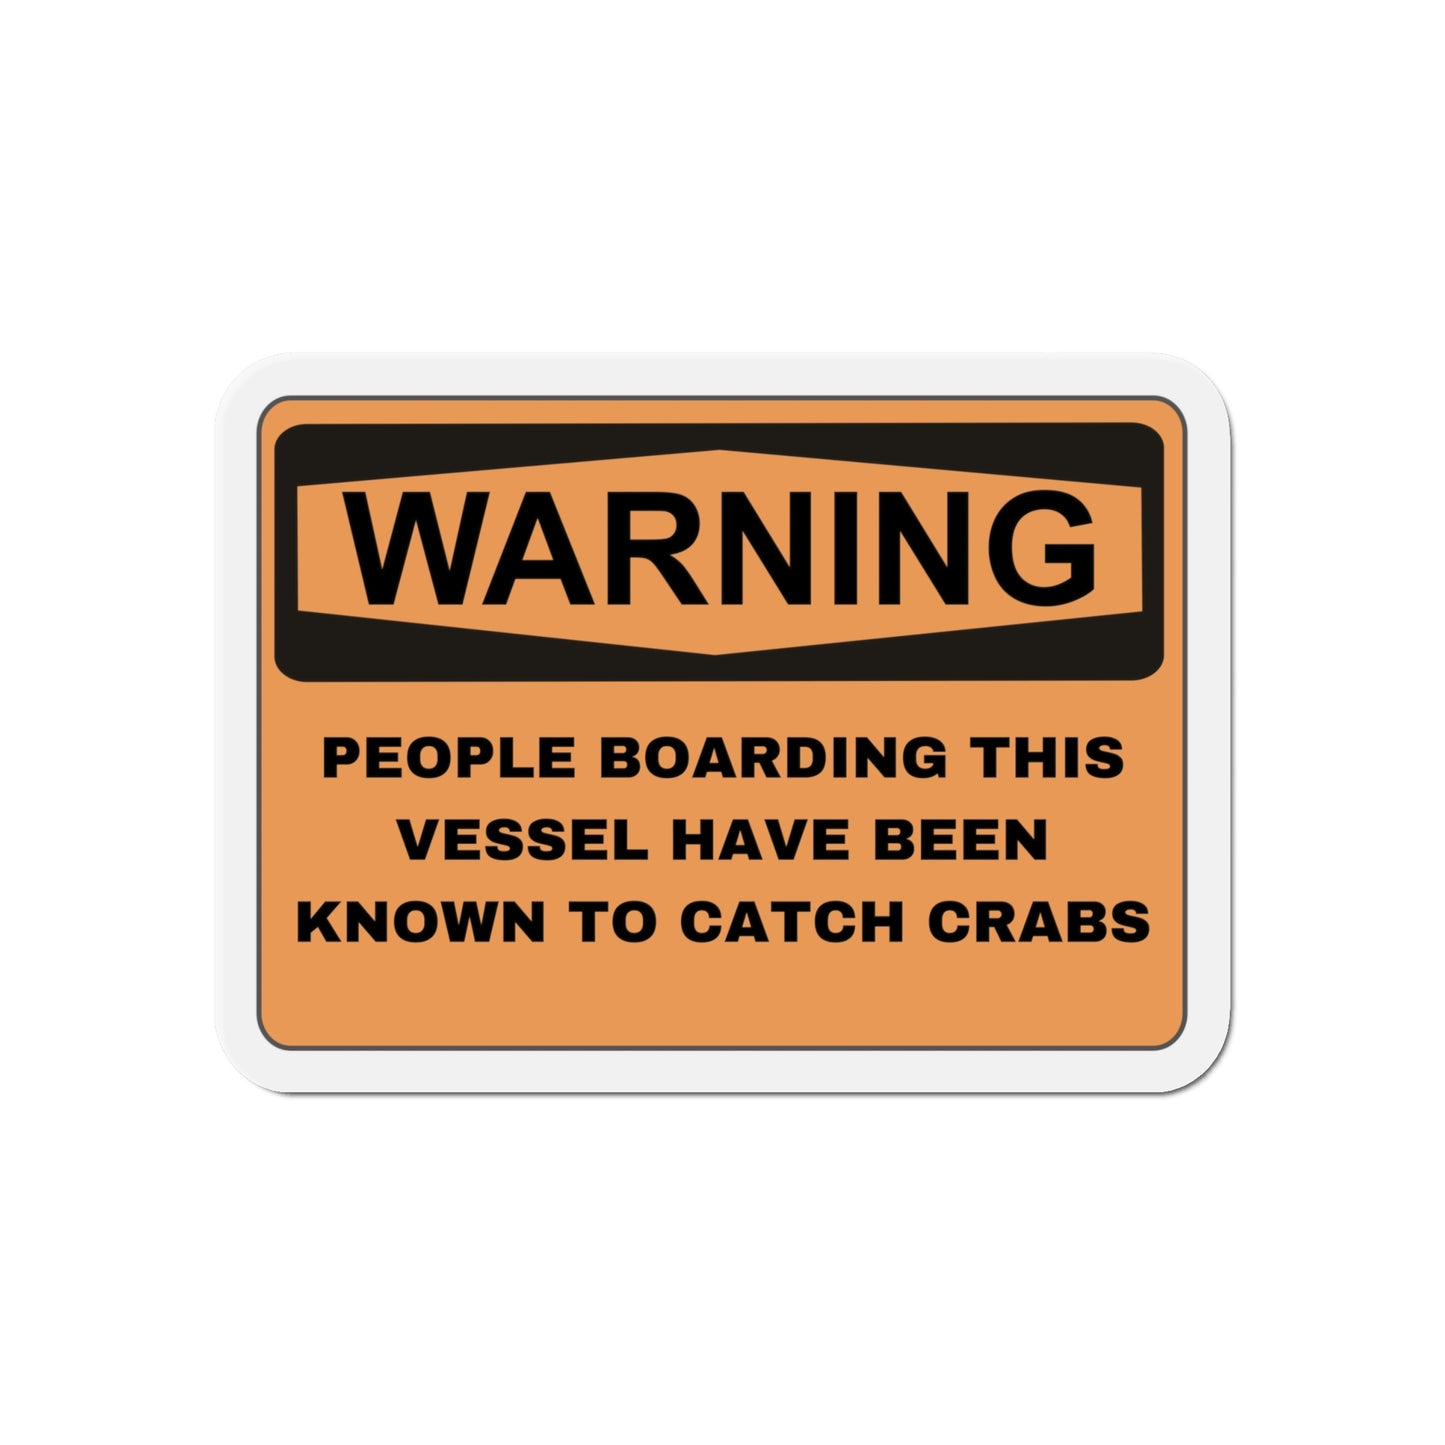 Funny Nautical Die-Cut Magnets, Warning People Boarding This Vessel Have Been Known To Catch Crabs, Funny Boat Sign,